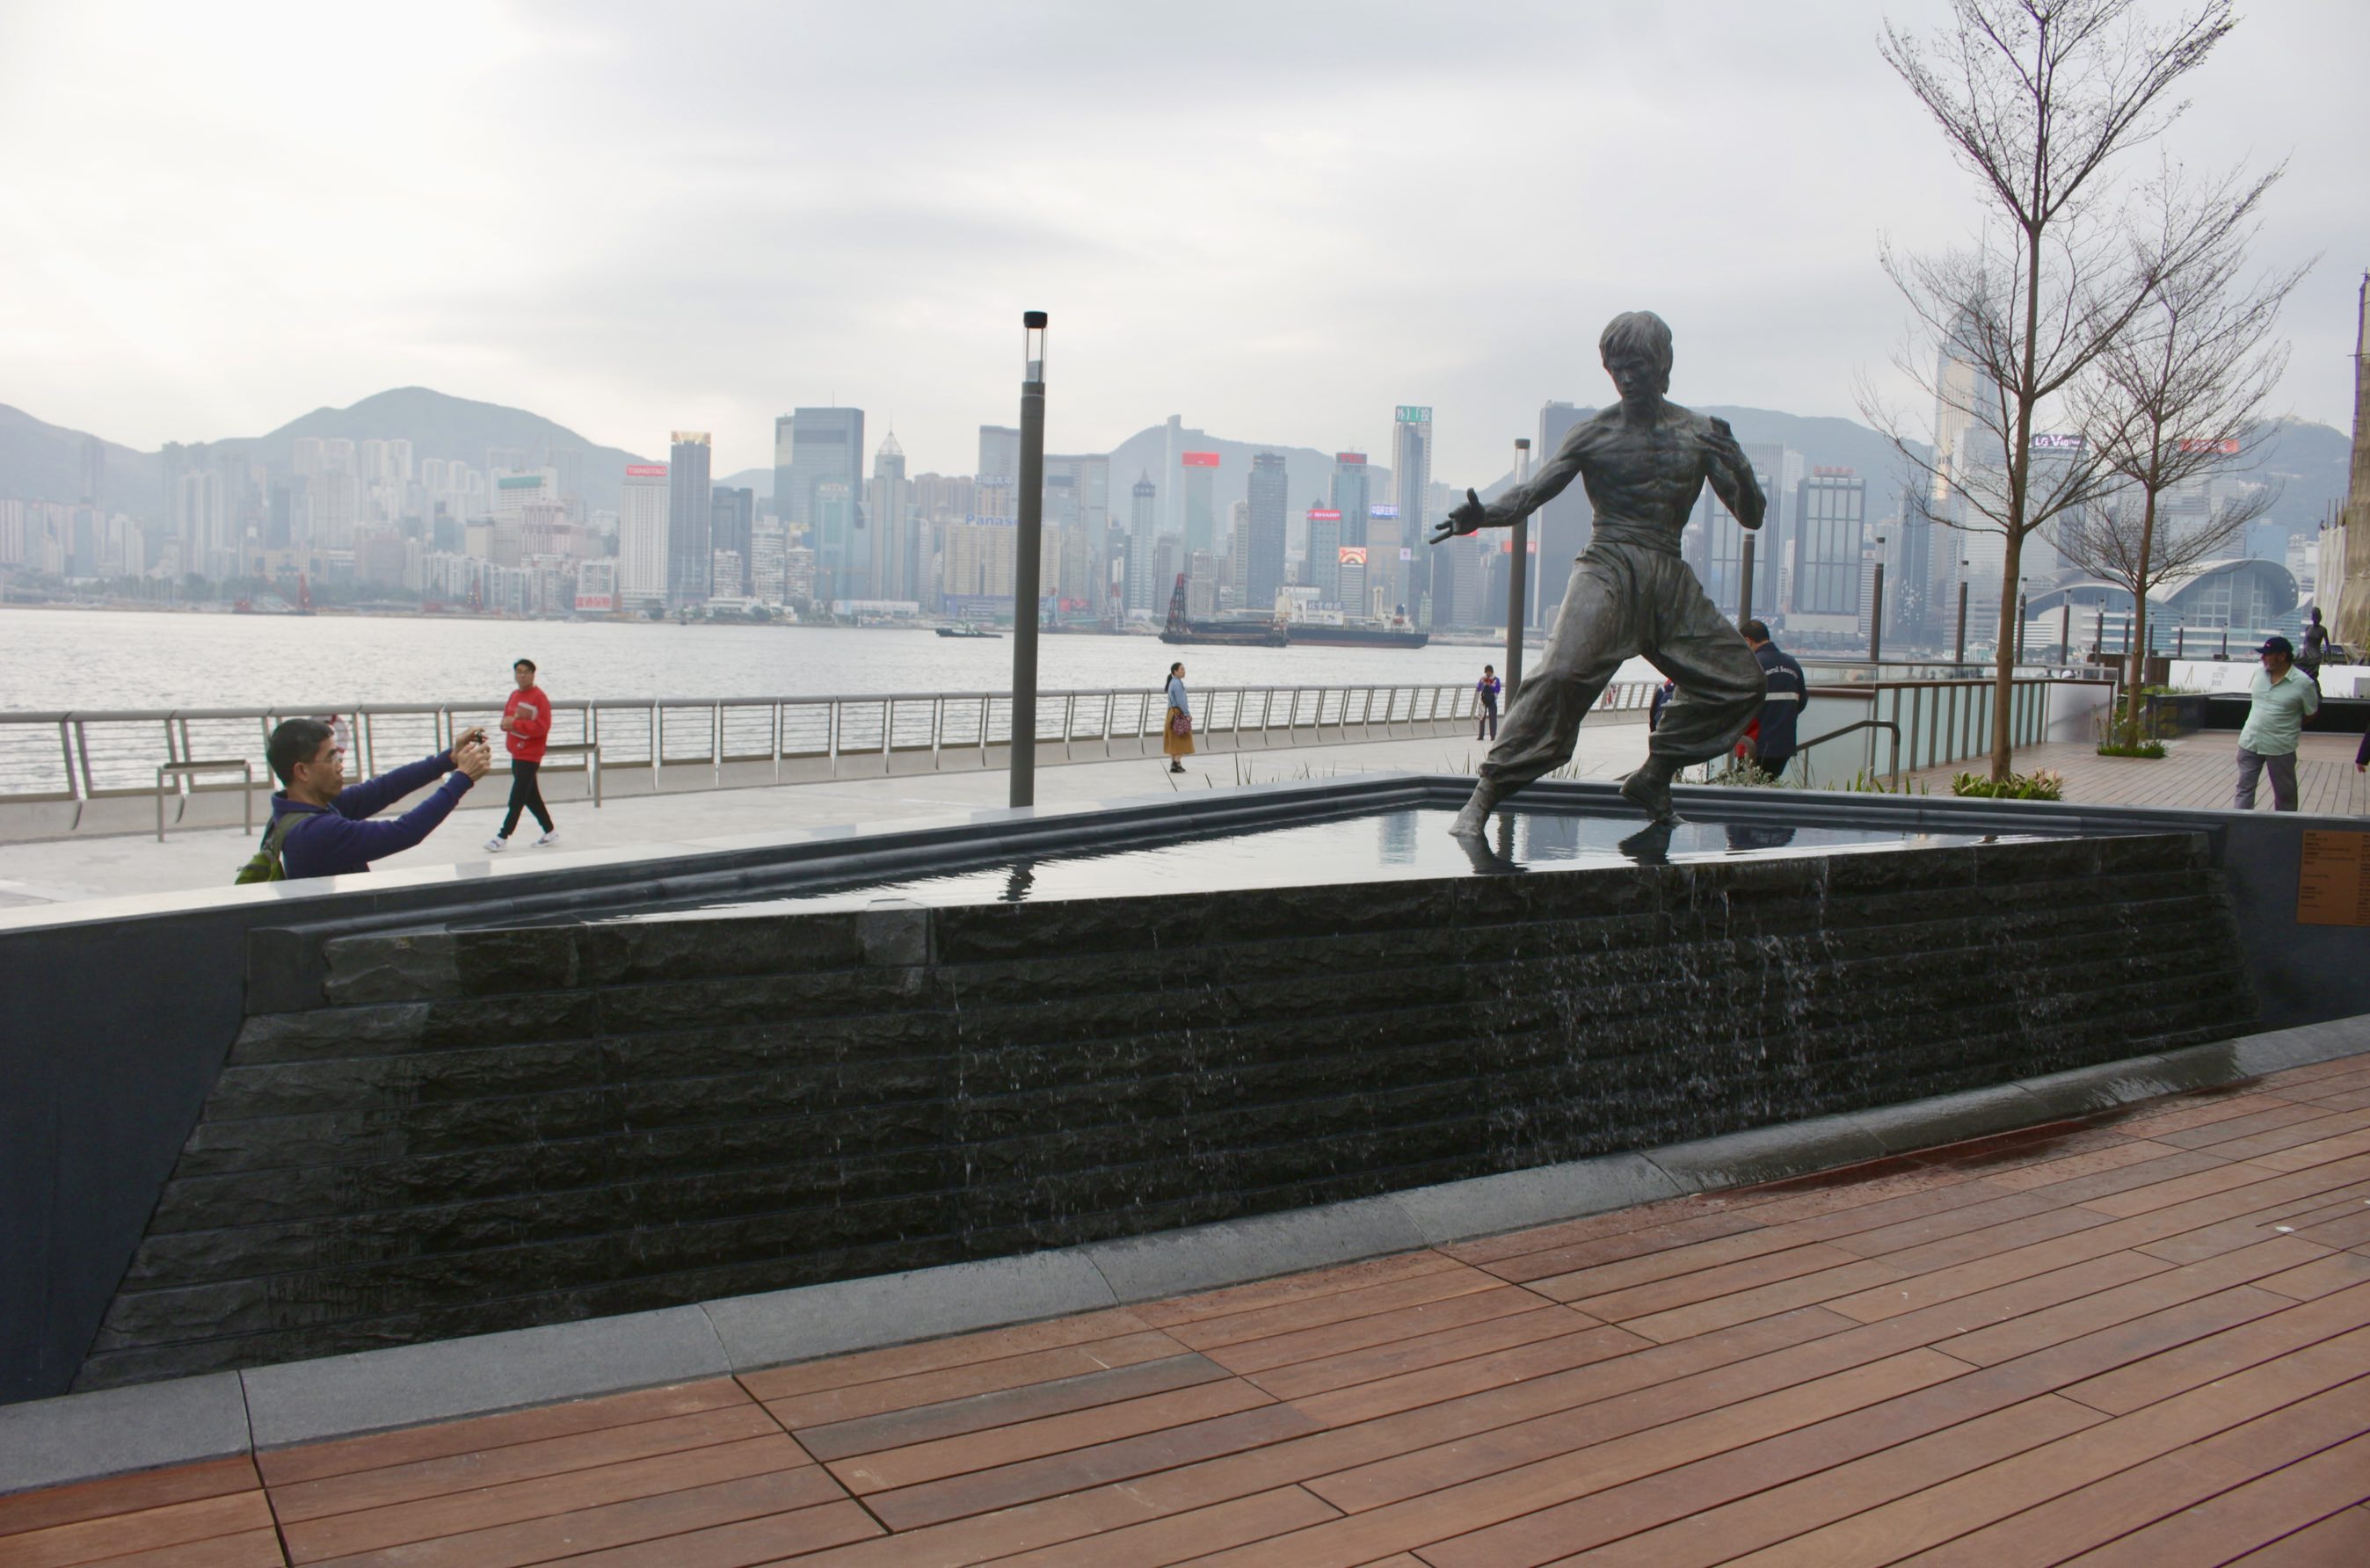 Bronze statue of kung fu movie legend Bruce Lee. His statue was previously surrounded by metal barrier to prevent people from touching the statue. Those barriers have now been replaced by a water feature with and is placed with Victoria Harbour in the background. Photo by Vicky Wong.